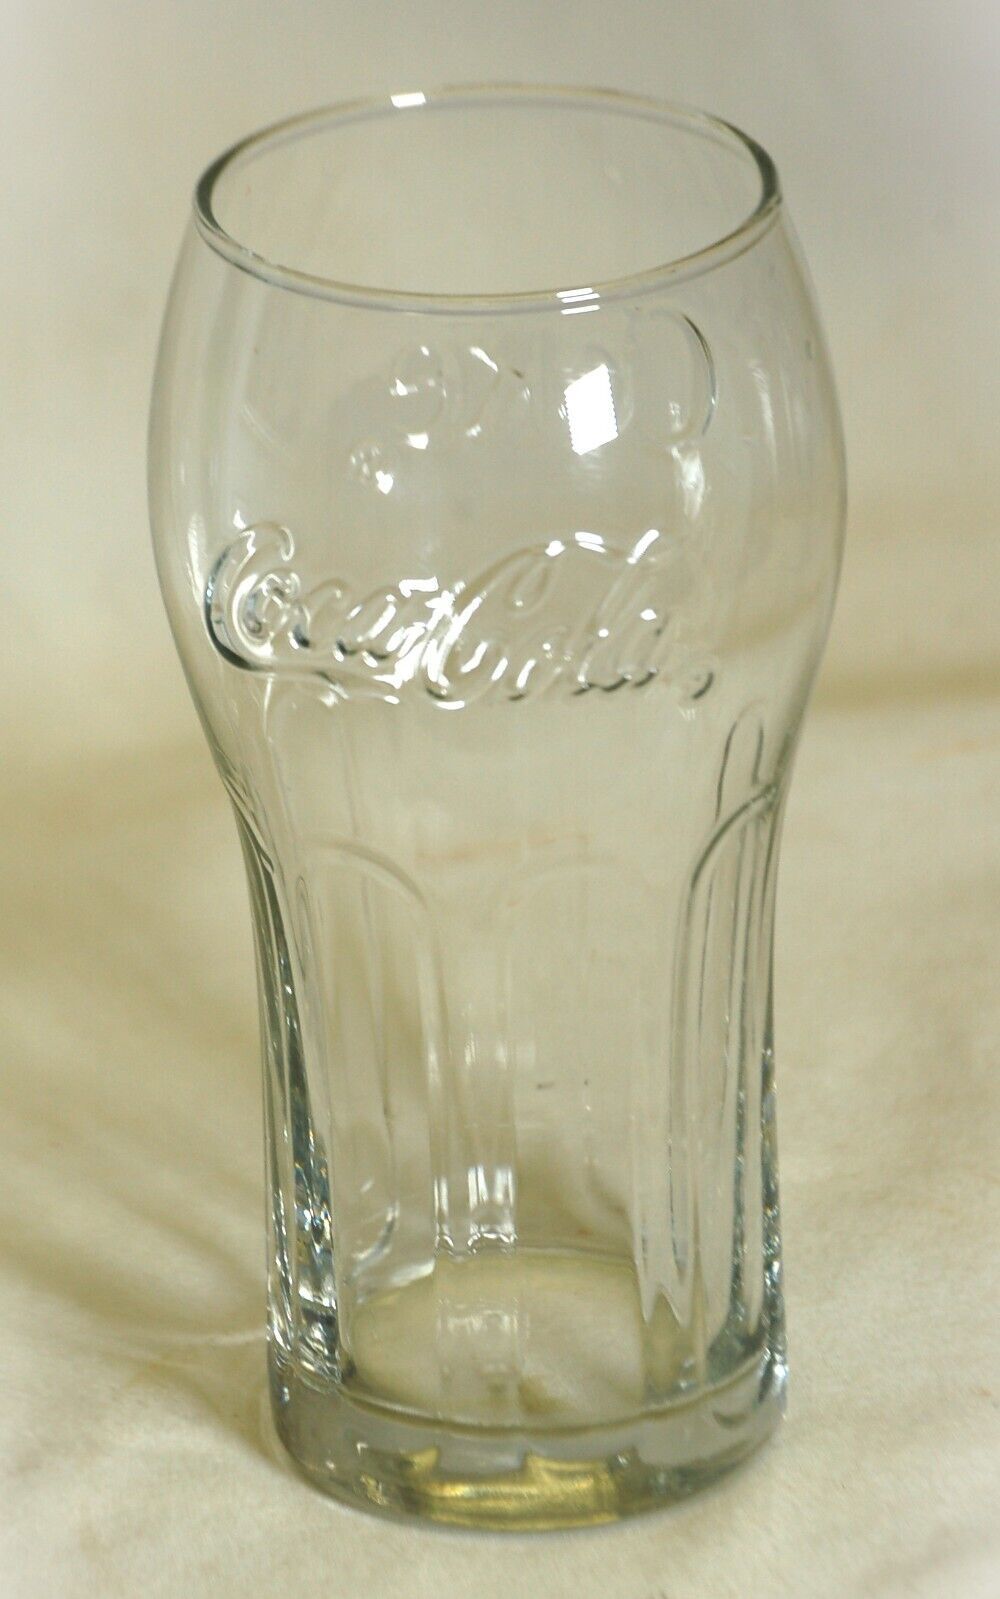 Primary image for Coca Cola Coke Flat Tumbler Glass Arched Paneled Sides 16 oz.